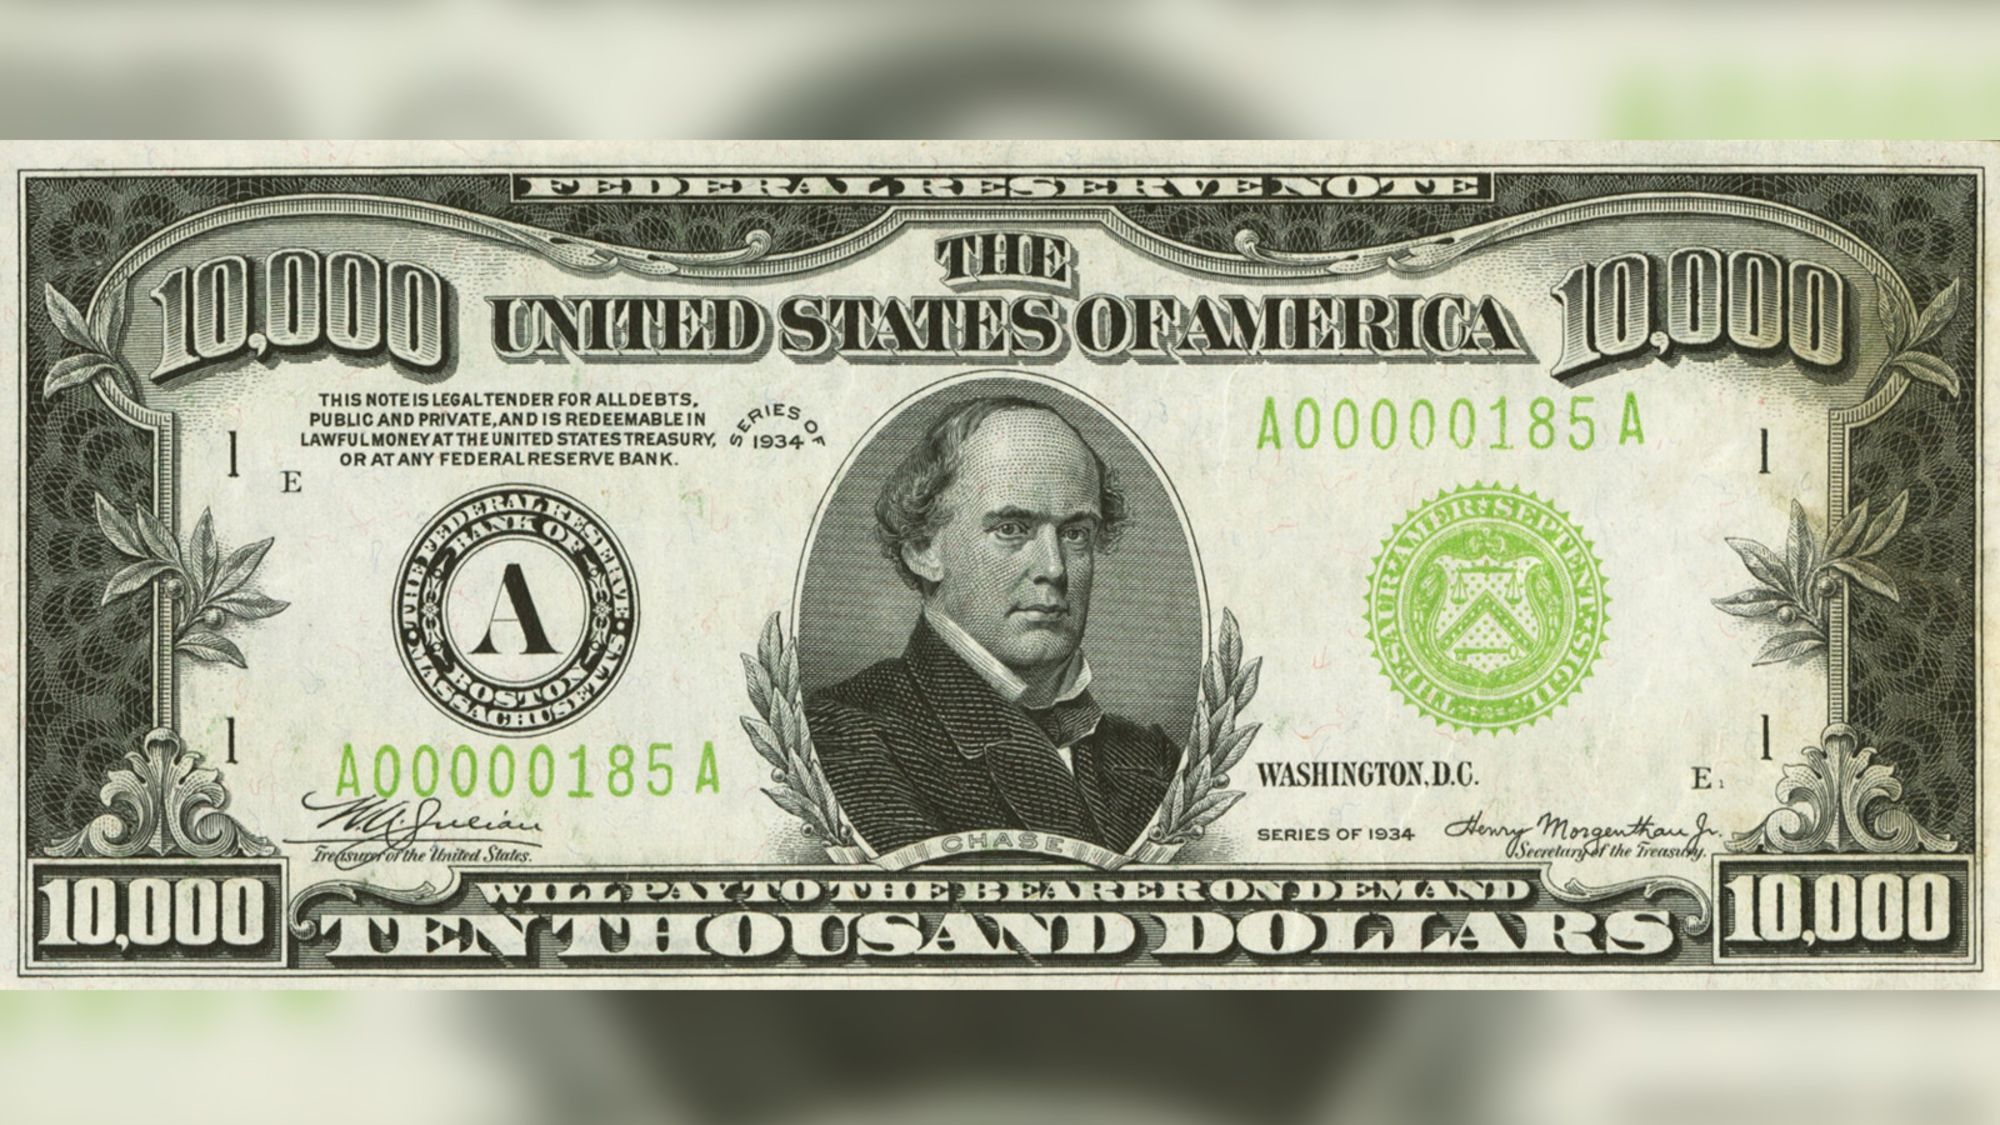 $10,000 bill from Great Depression era sells for $480,000 at